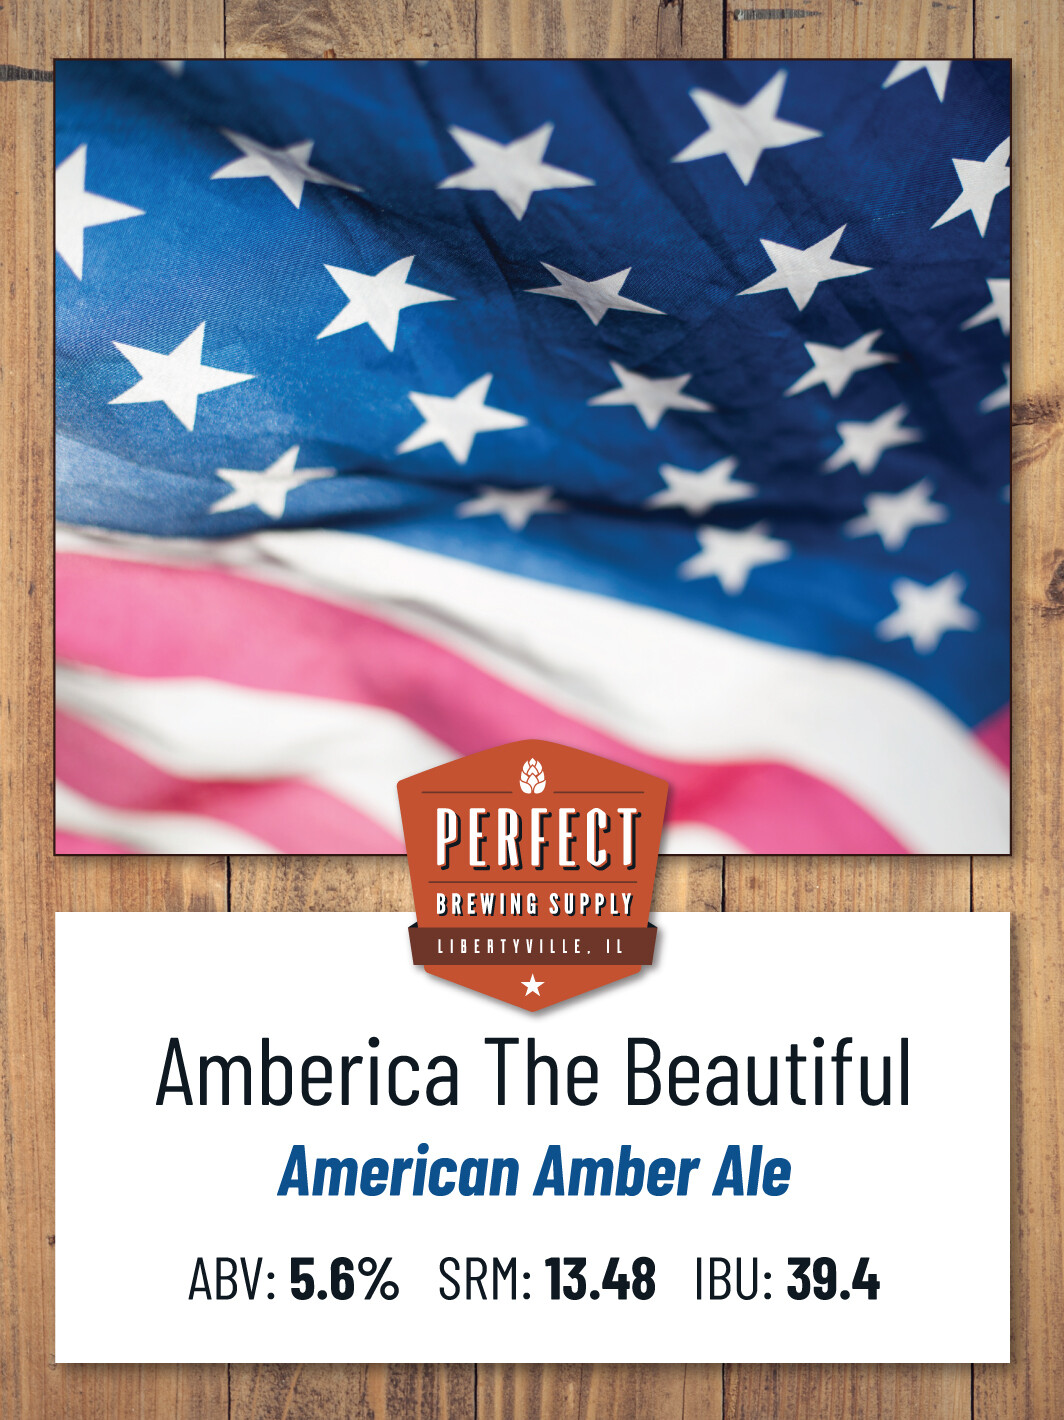 Amberica the Beautiful - Beer Kit Perfect Brewing Supply